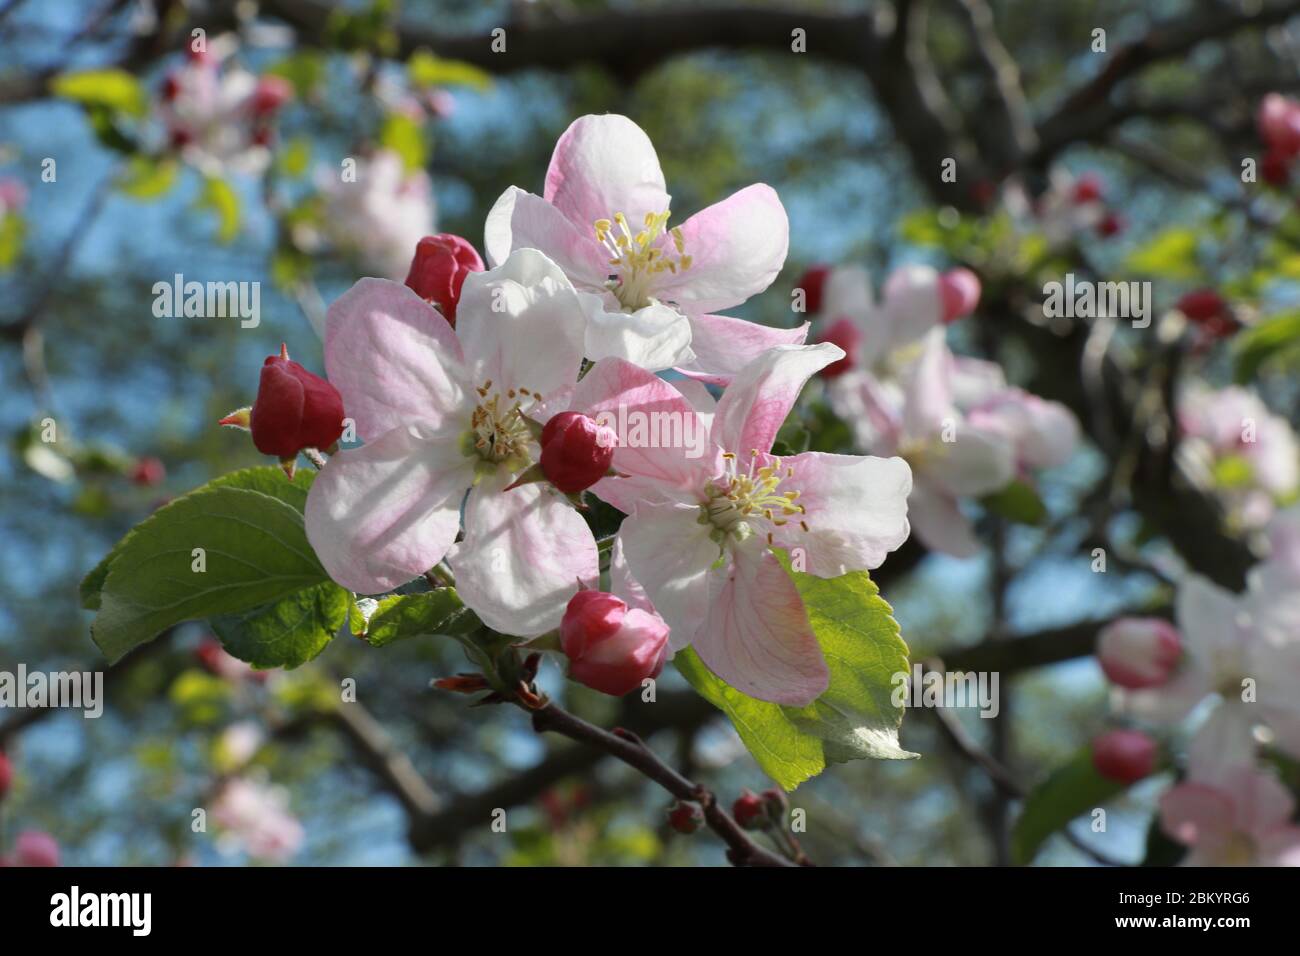 Group of blossoms of an apple tree (Rewena) in spring time. Stock Photo